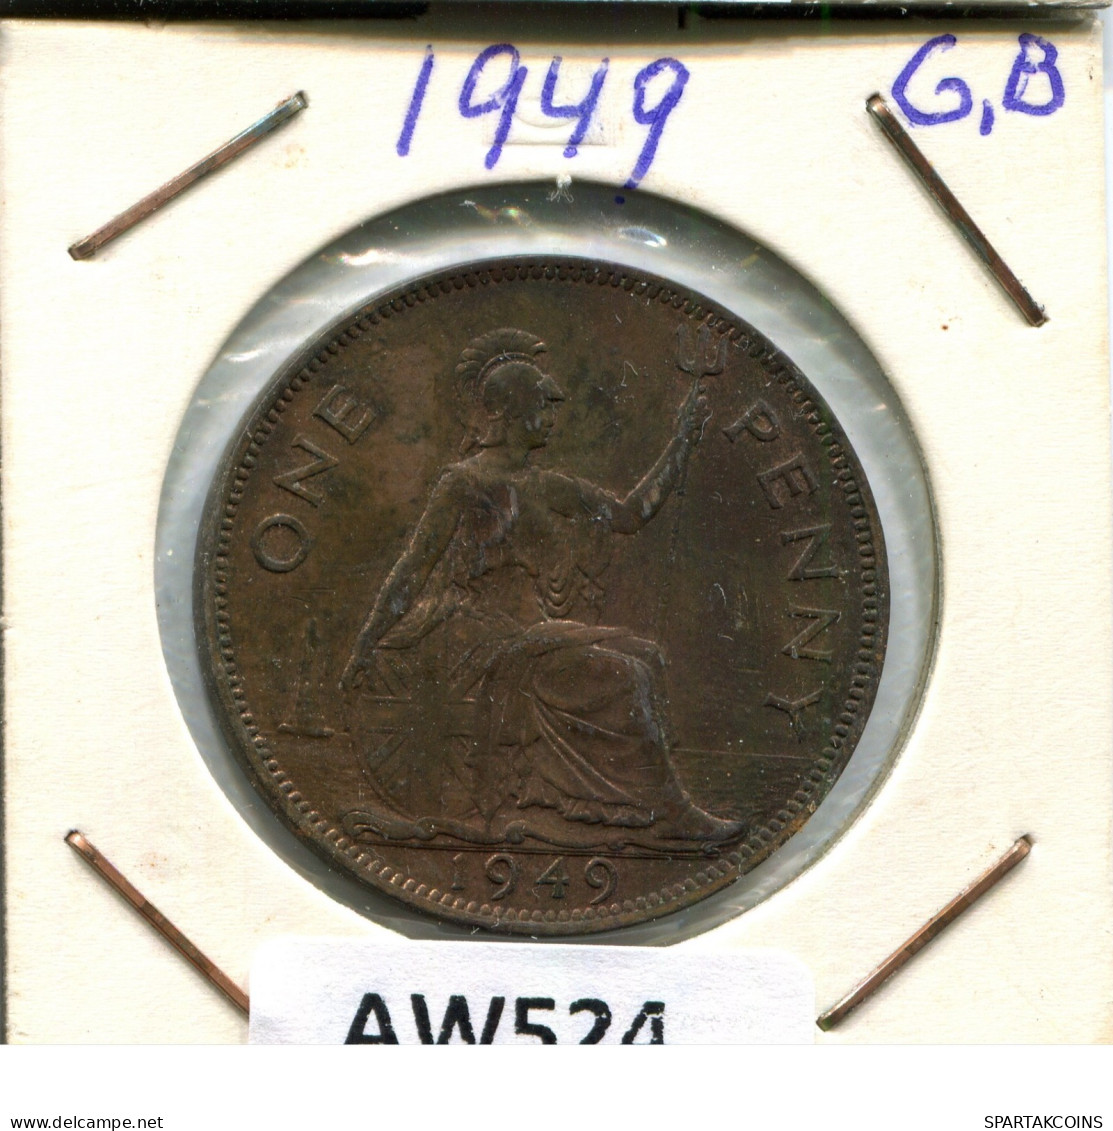 PENNY 1949 UK GREAT BRITAIN Coin #AW524.U.A - D. 1 Penny